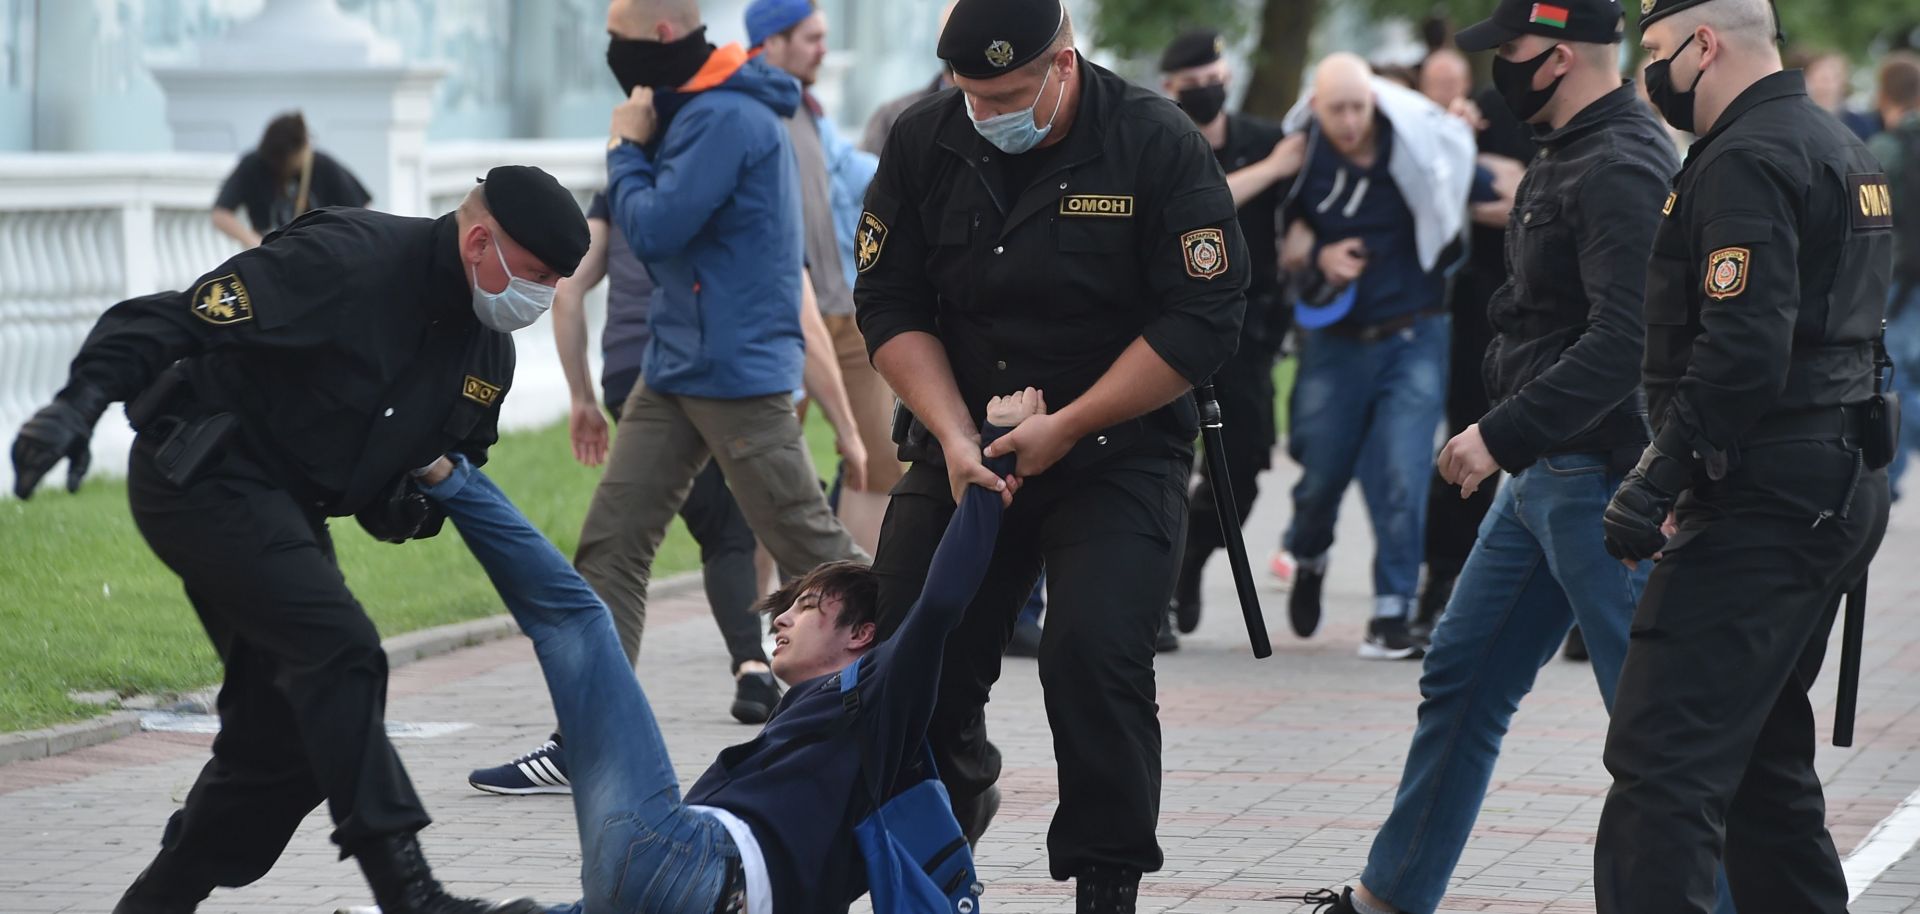 Plainclothed Belarus' security forces and riot police officers detain a protester at an opposition demonstration in Minsk, Belarus, on July 14, 2020.